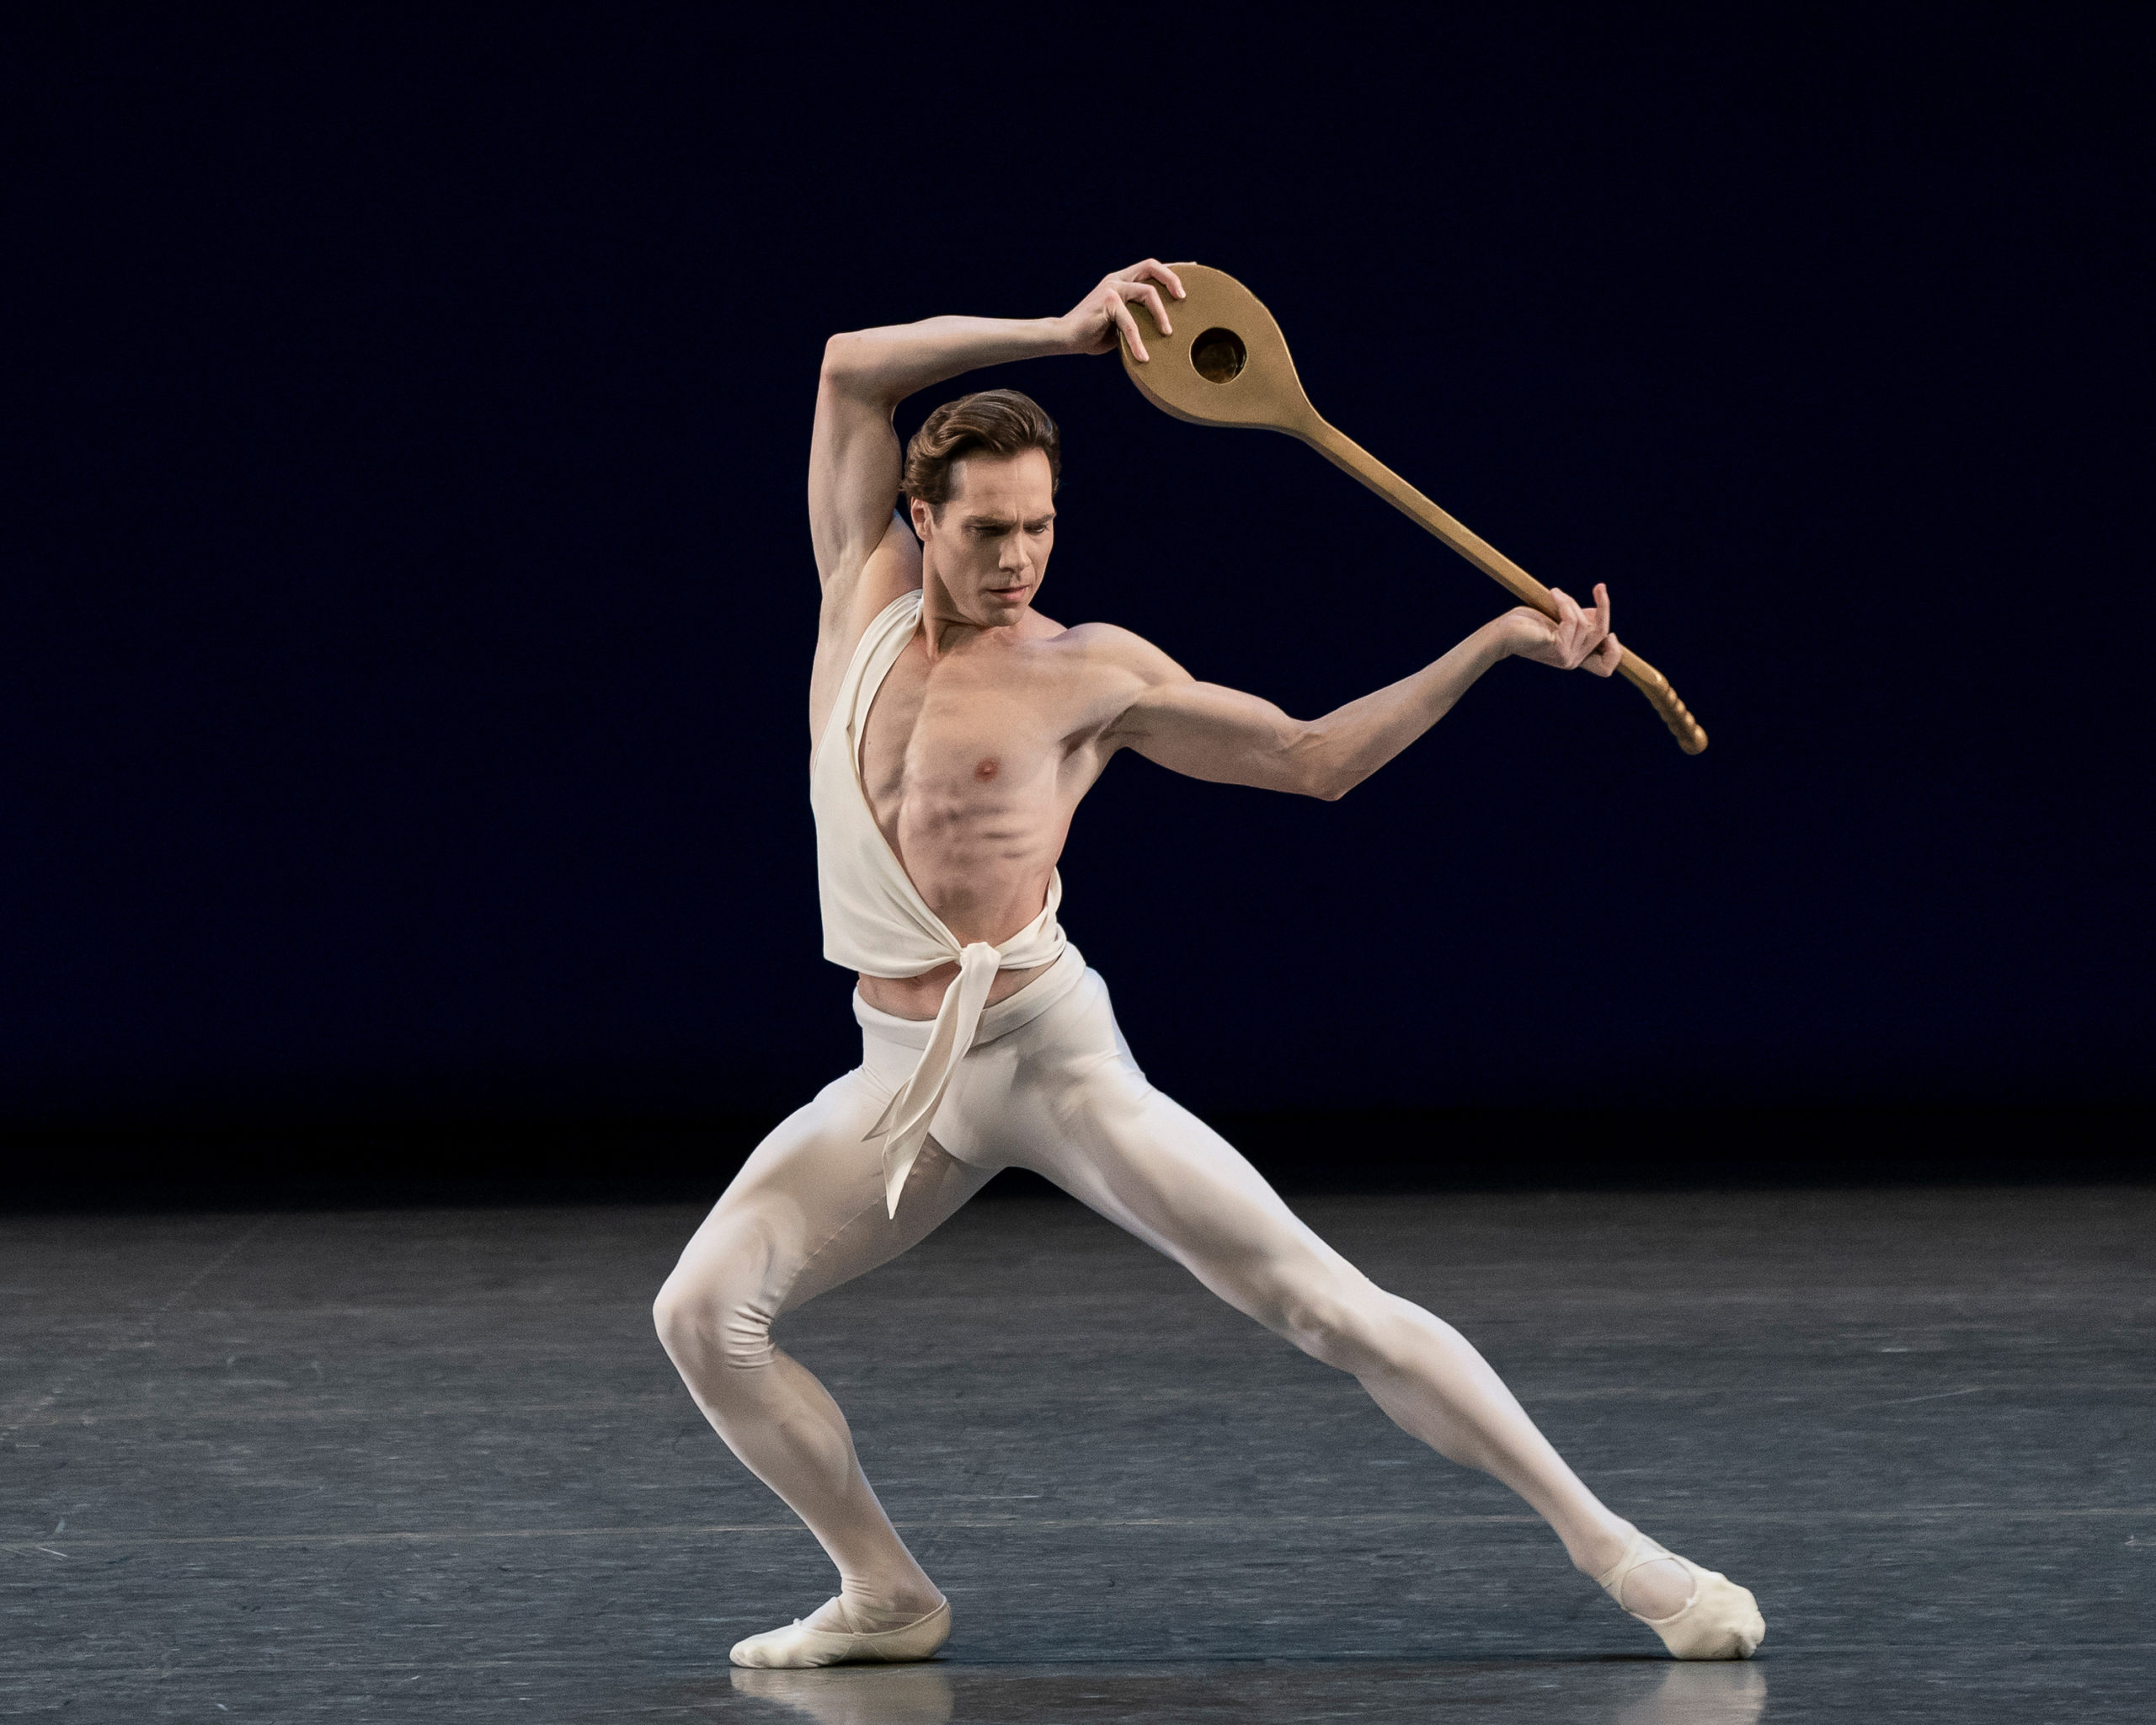 Gonzalo Garcia lunges onto his right leg onstage during a performance, stretching his left leg out to the side. He wears white tights and ballet slippers and a white toga-like shirt around his right shoulder. The left side of his chest is bare, and he lifts a lute above his head, looking down towards his left foot.